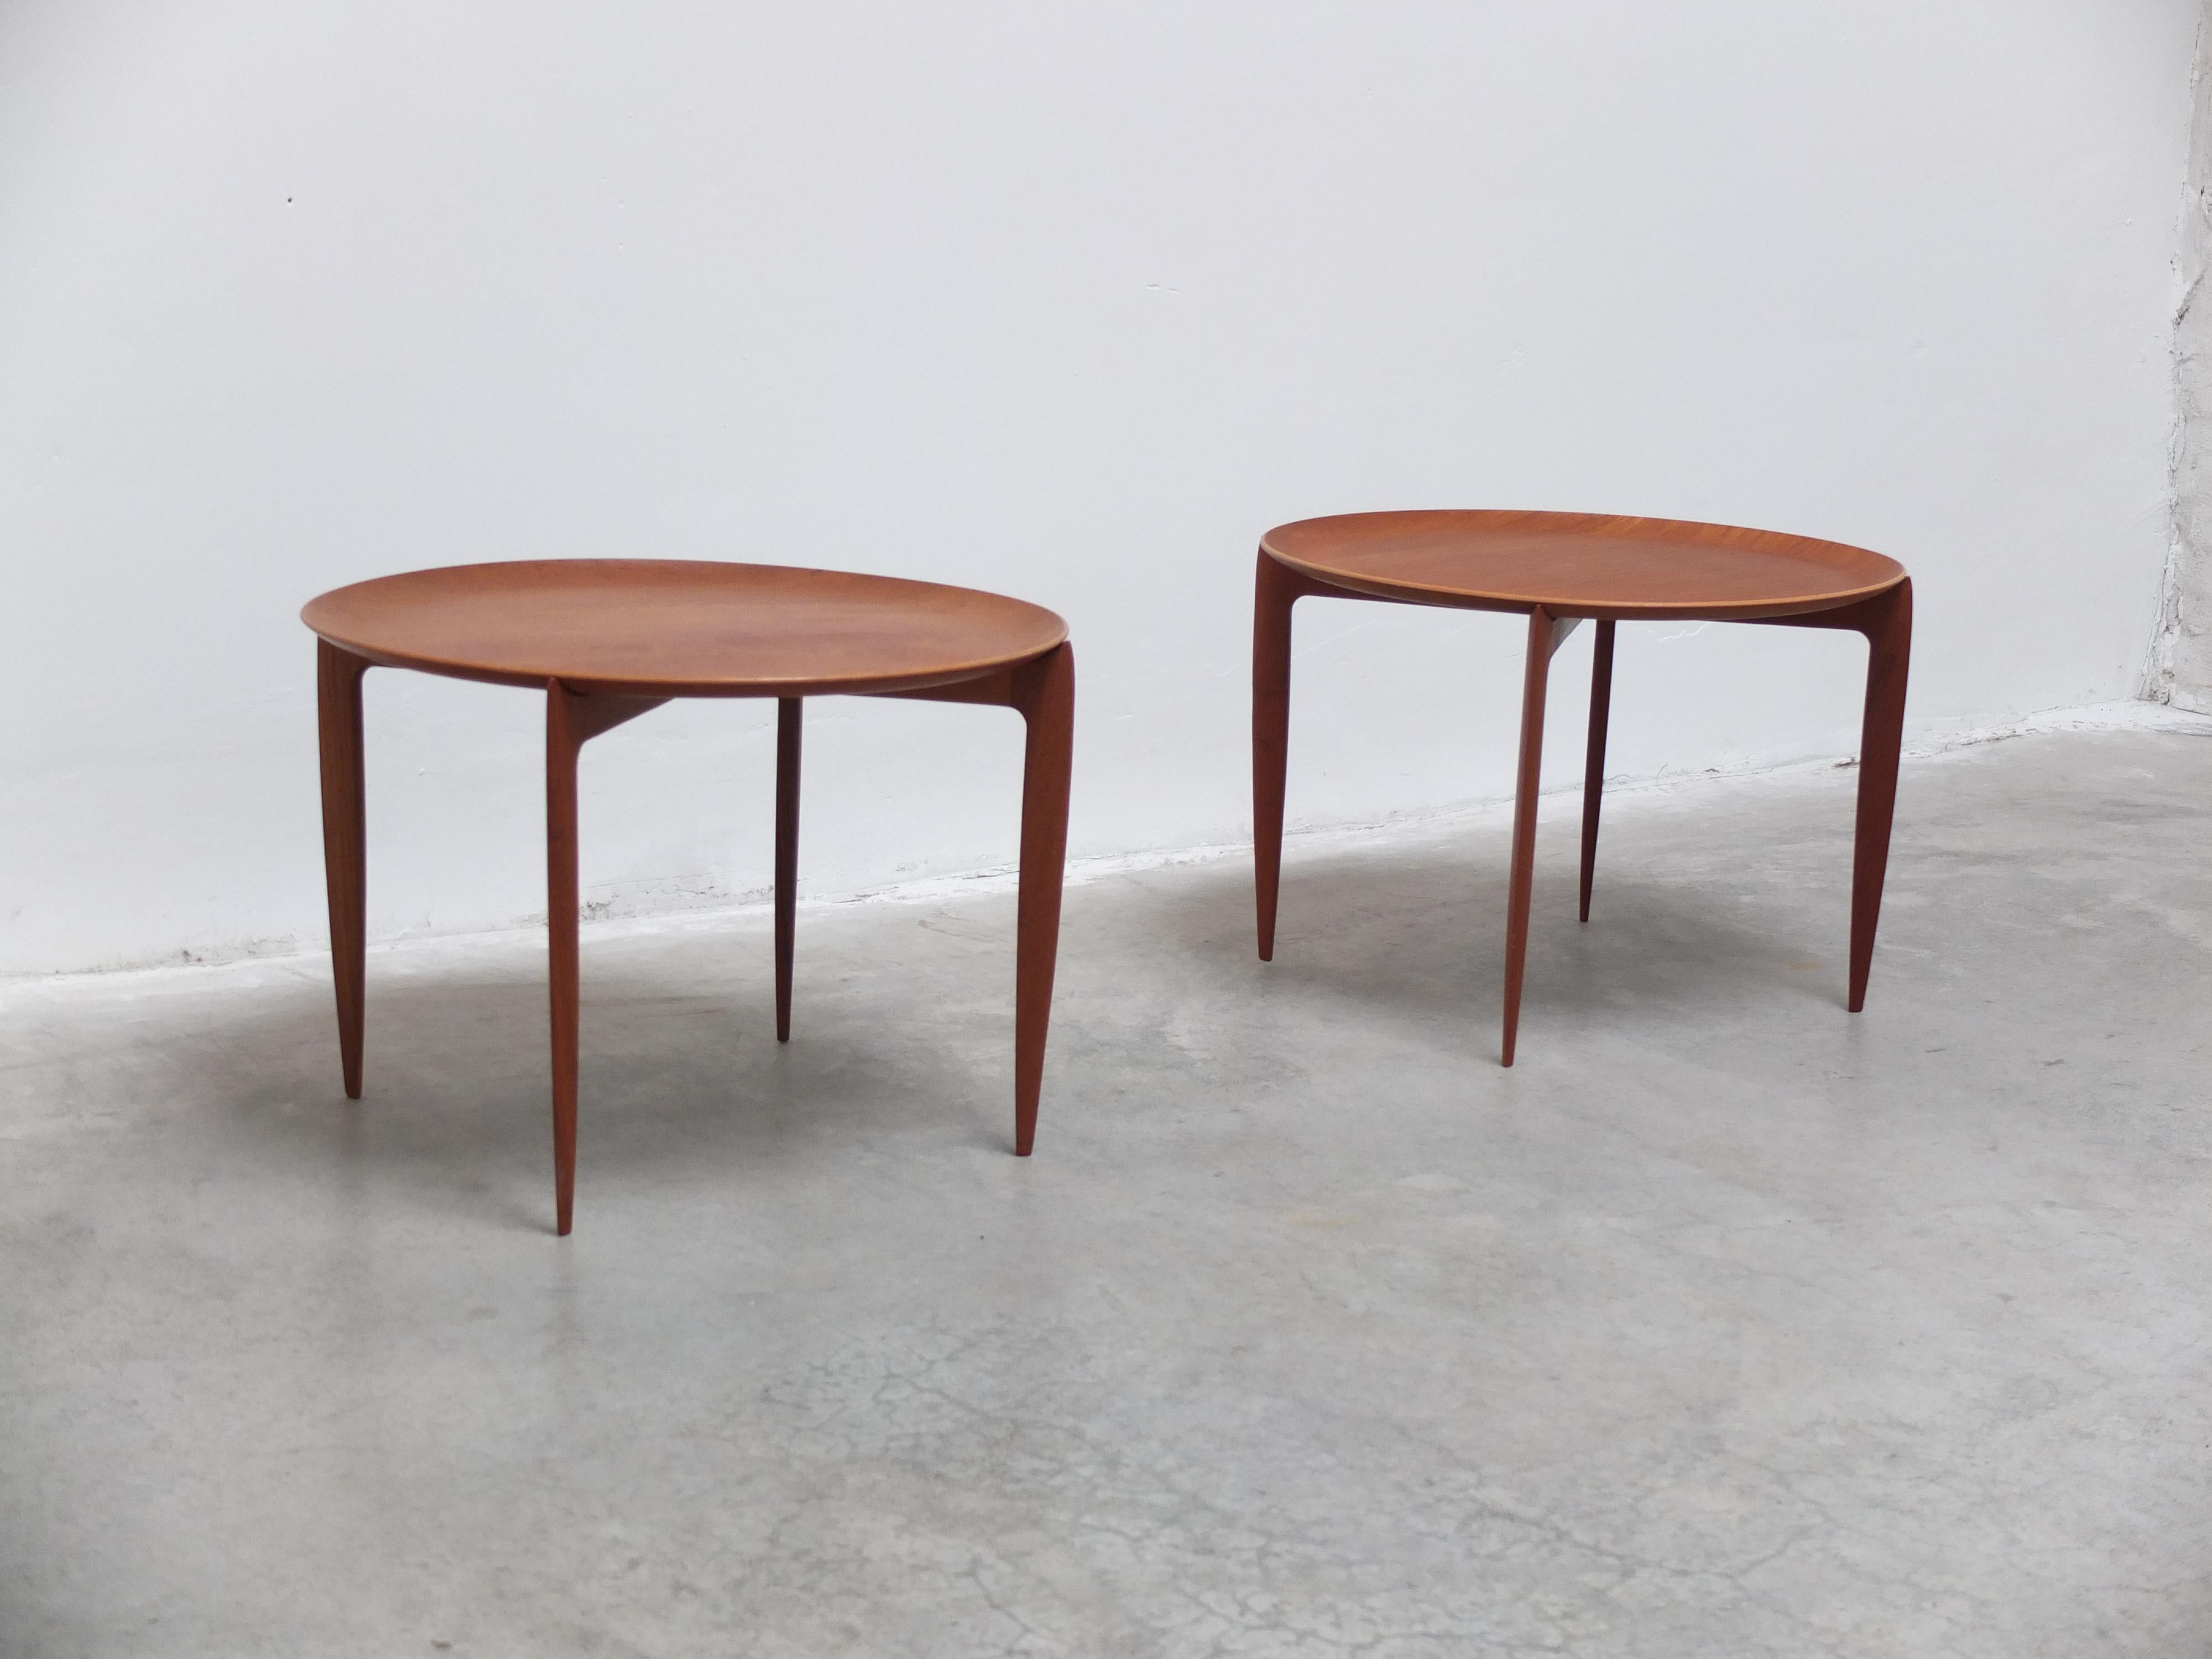 Scandinavian Modern Early Pair of Tray Tables in Teak by Willumsen & Engholm for Fritz Hansen, 1958 For Sale